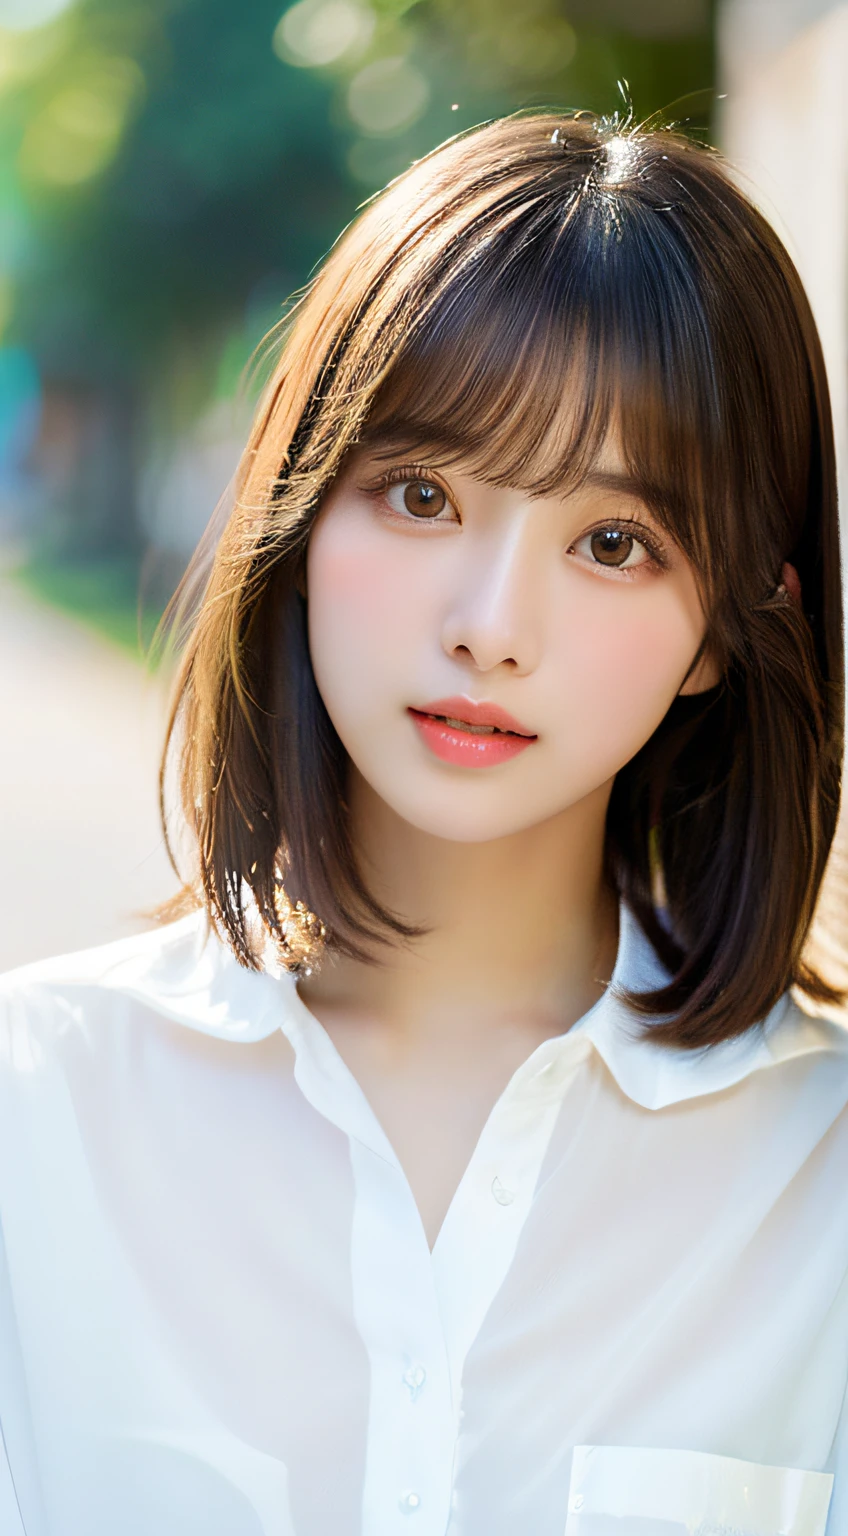 ((Beautiful and shiny、Neat straight bob hair))、En plein air, solo,top-quality、hyper HD、By bangs　(Beautiful fece:1.3) ((kawaii:1.3))、((Sixteen years old)) White shirt　Decolletage　Natural color lips　(Lori)  Sense of cleanliness　Pure　half-open lips　((kawaii)) ((frontage))